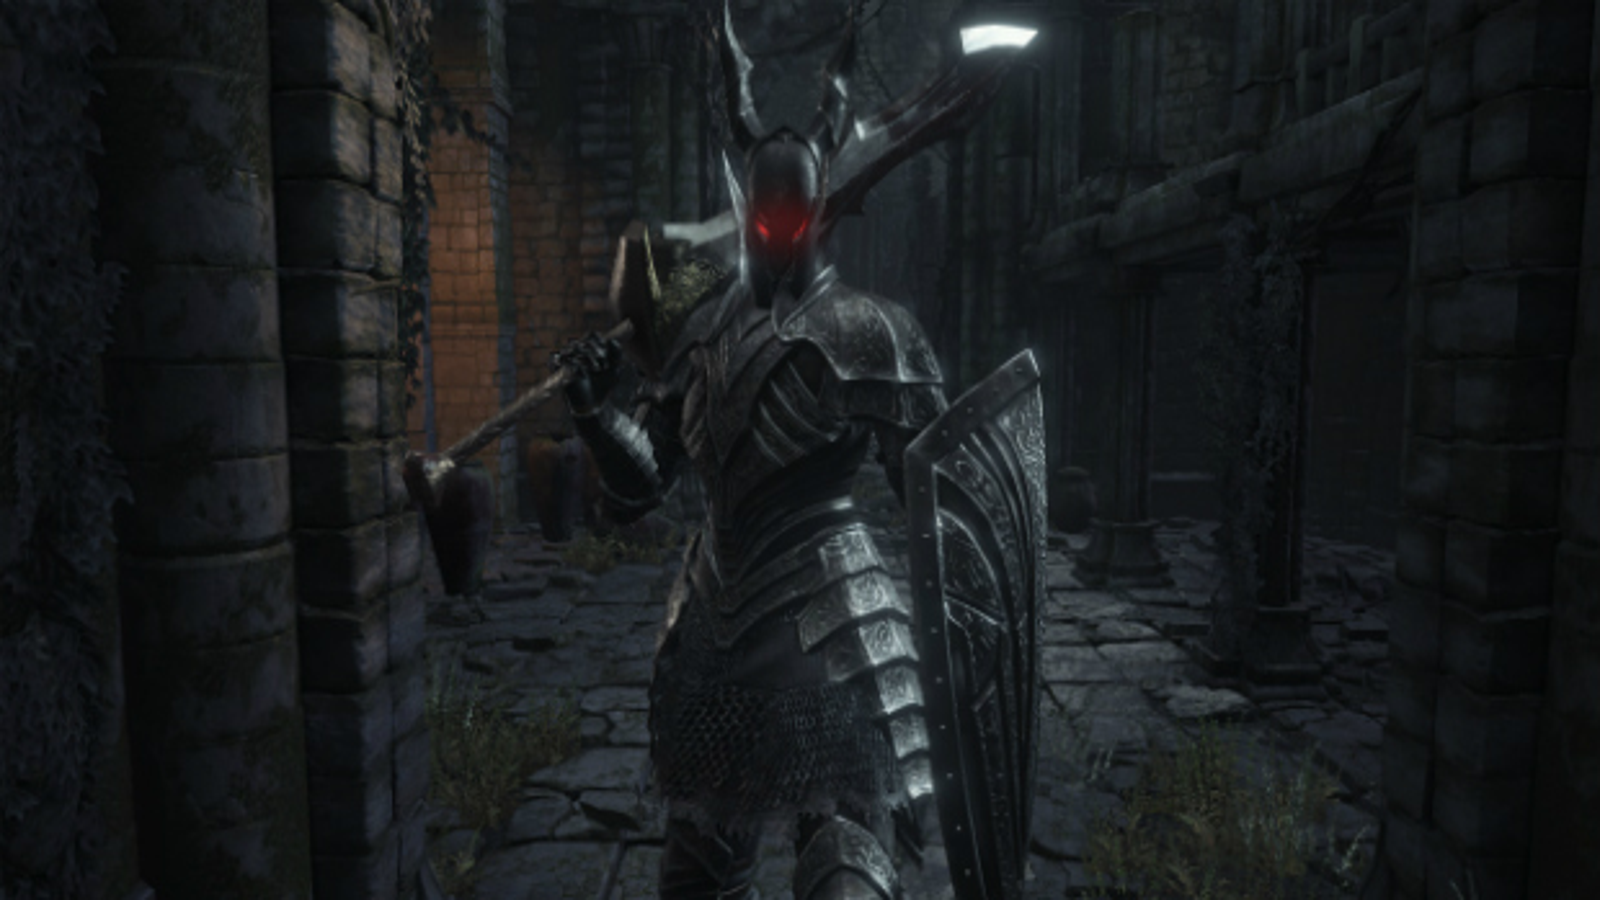 Dark souls 3 is the best game ever. Except the poise issue, that